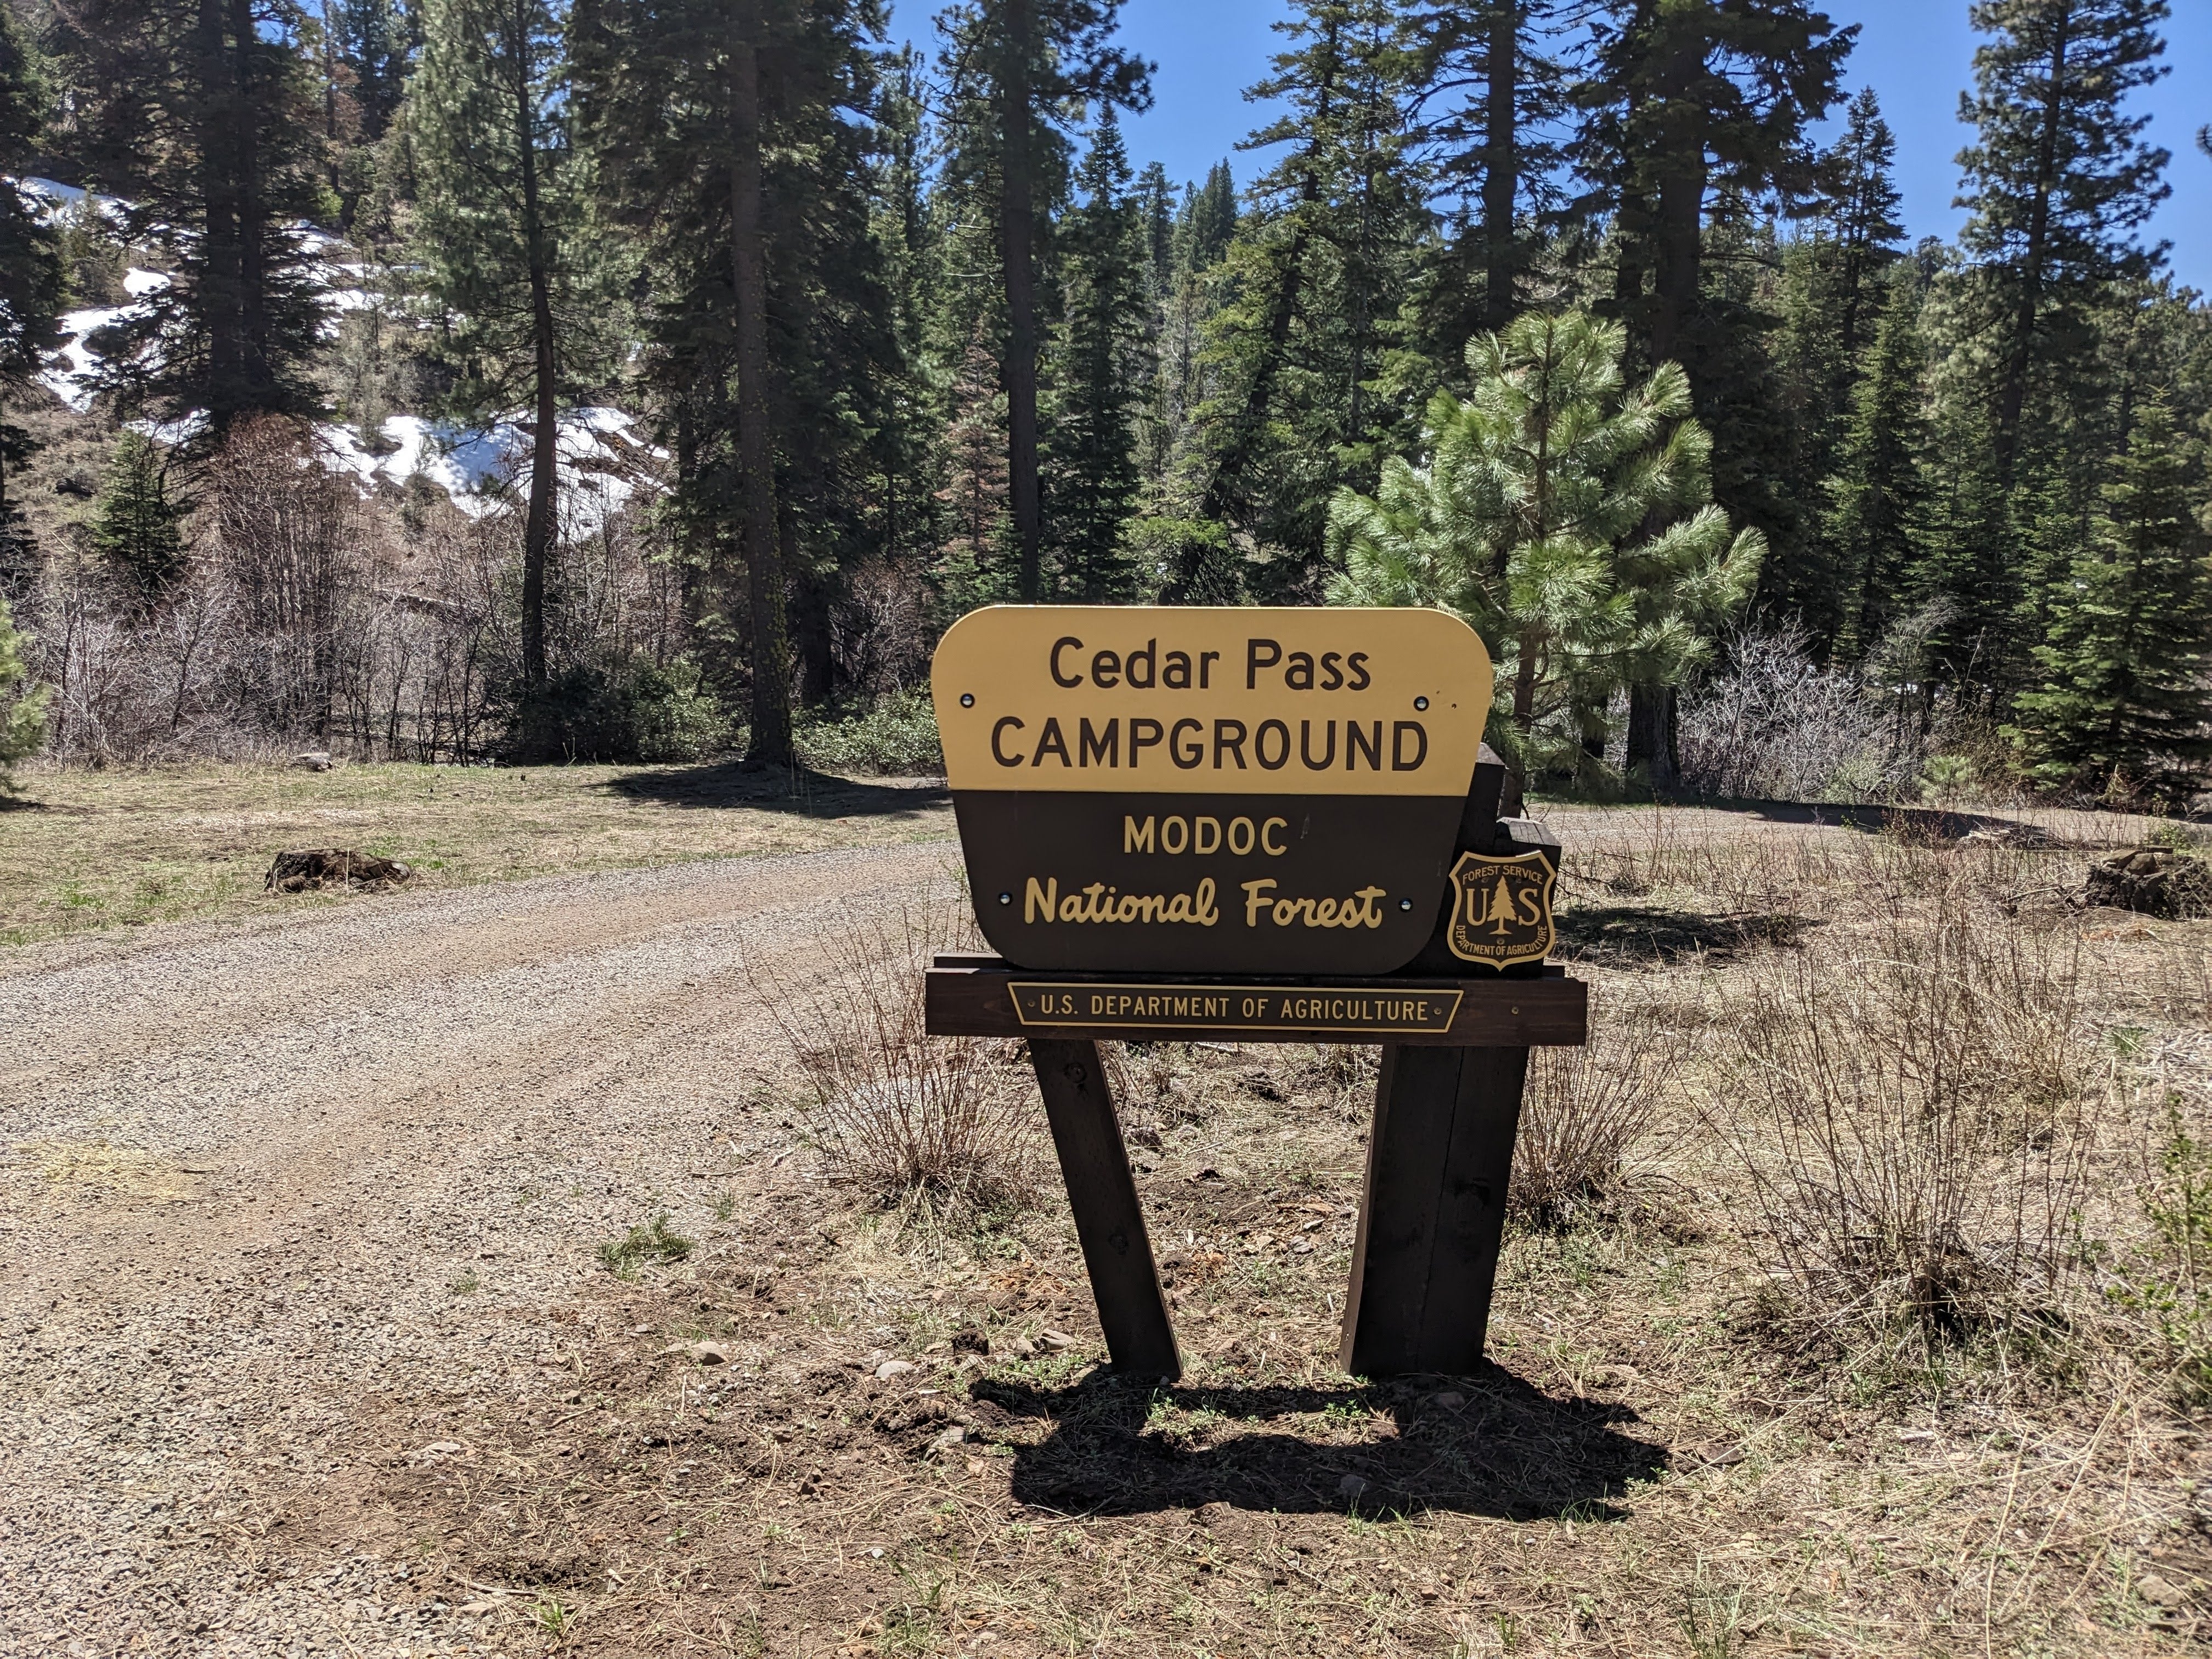 Camper submitted image from Cedar Pass Campground - 2